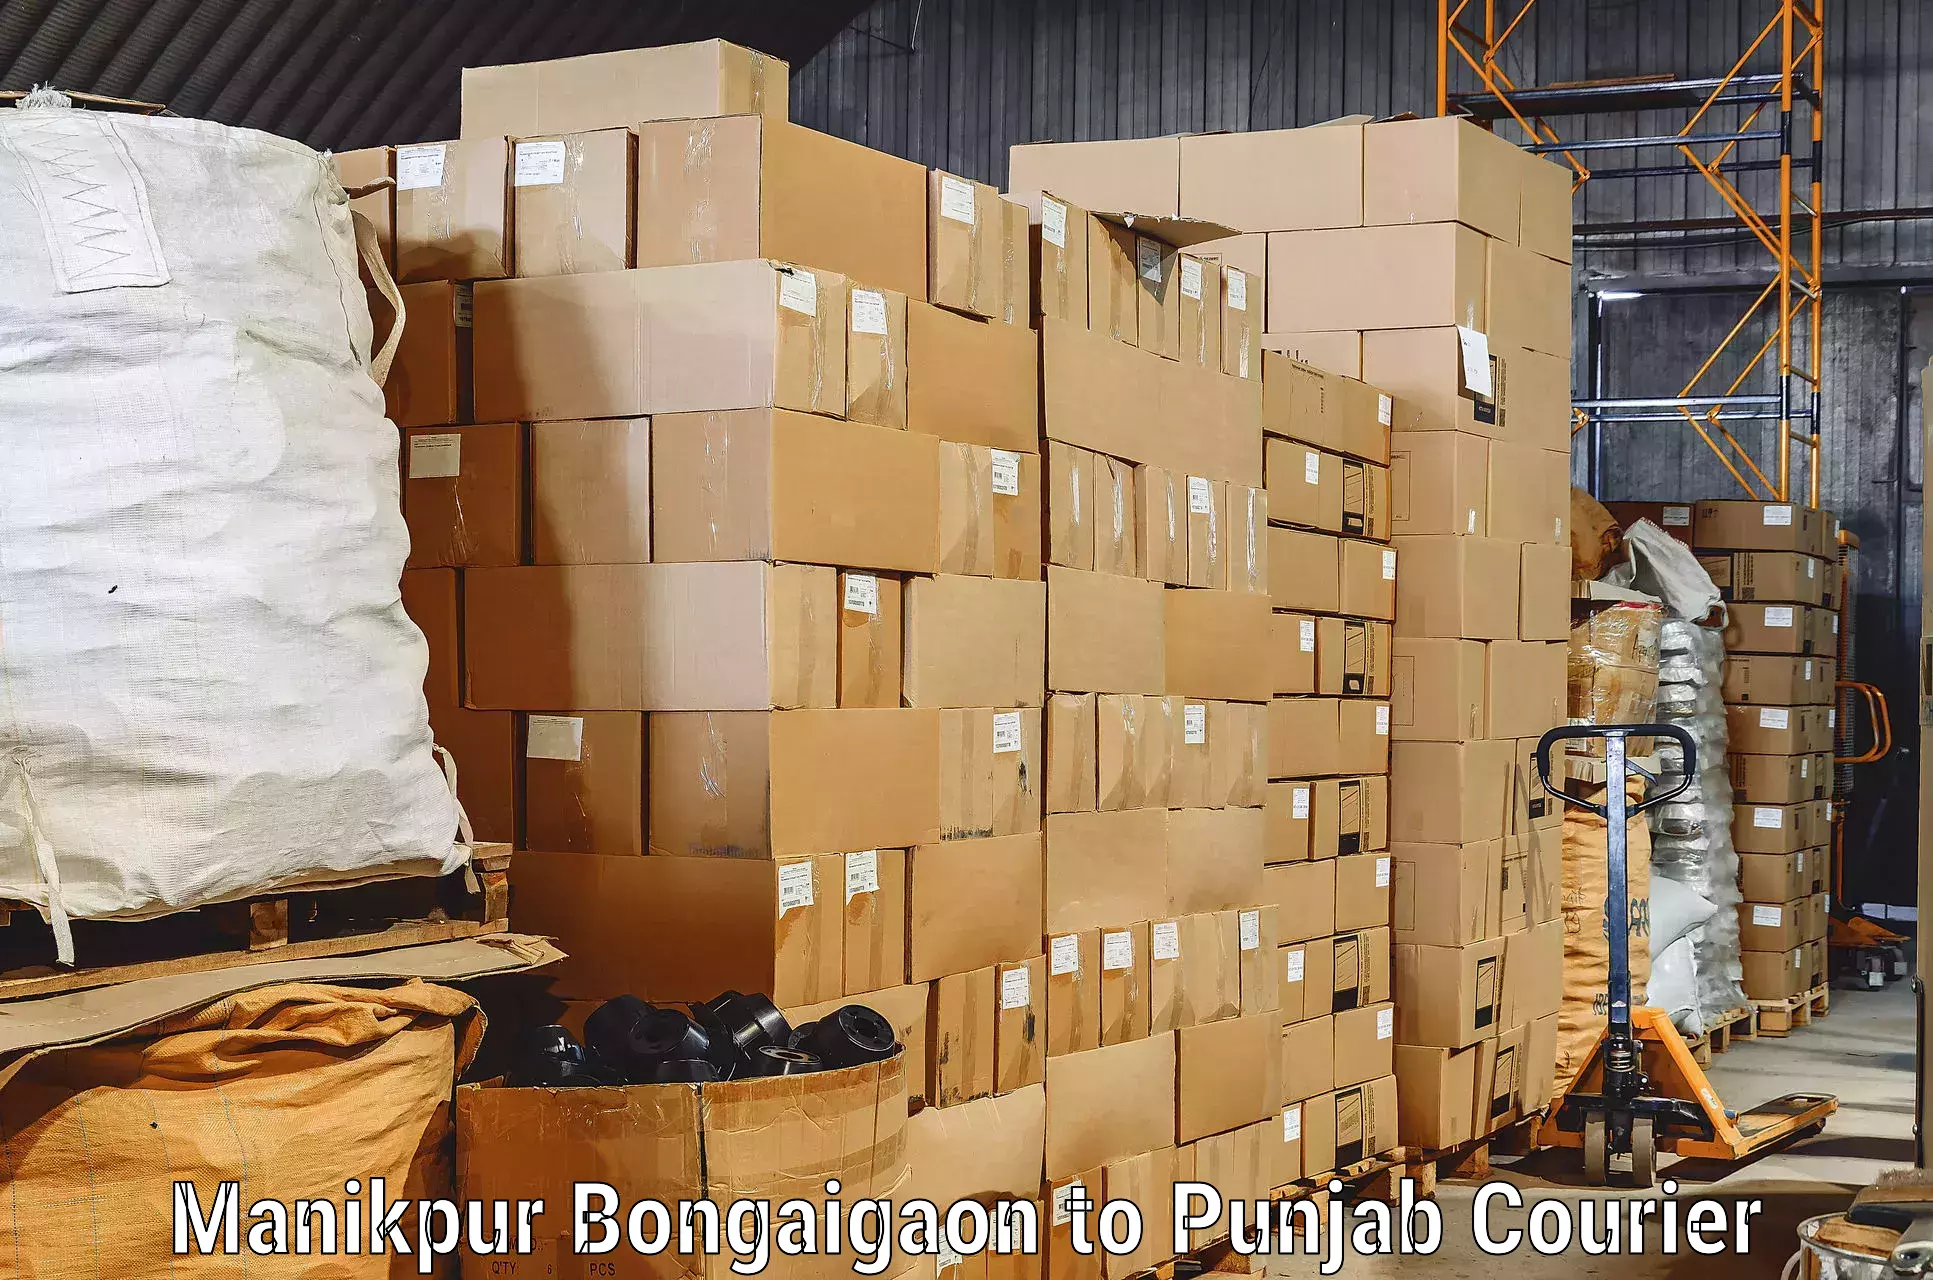 Professional goods transport in Manikpur Bongaigaon to Mohali